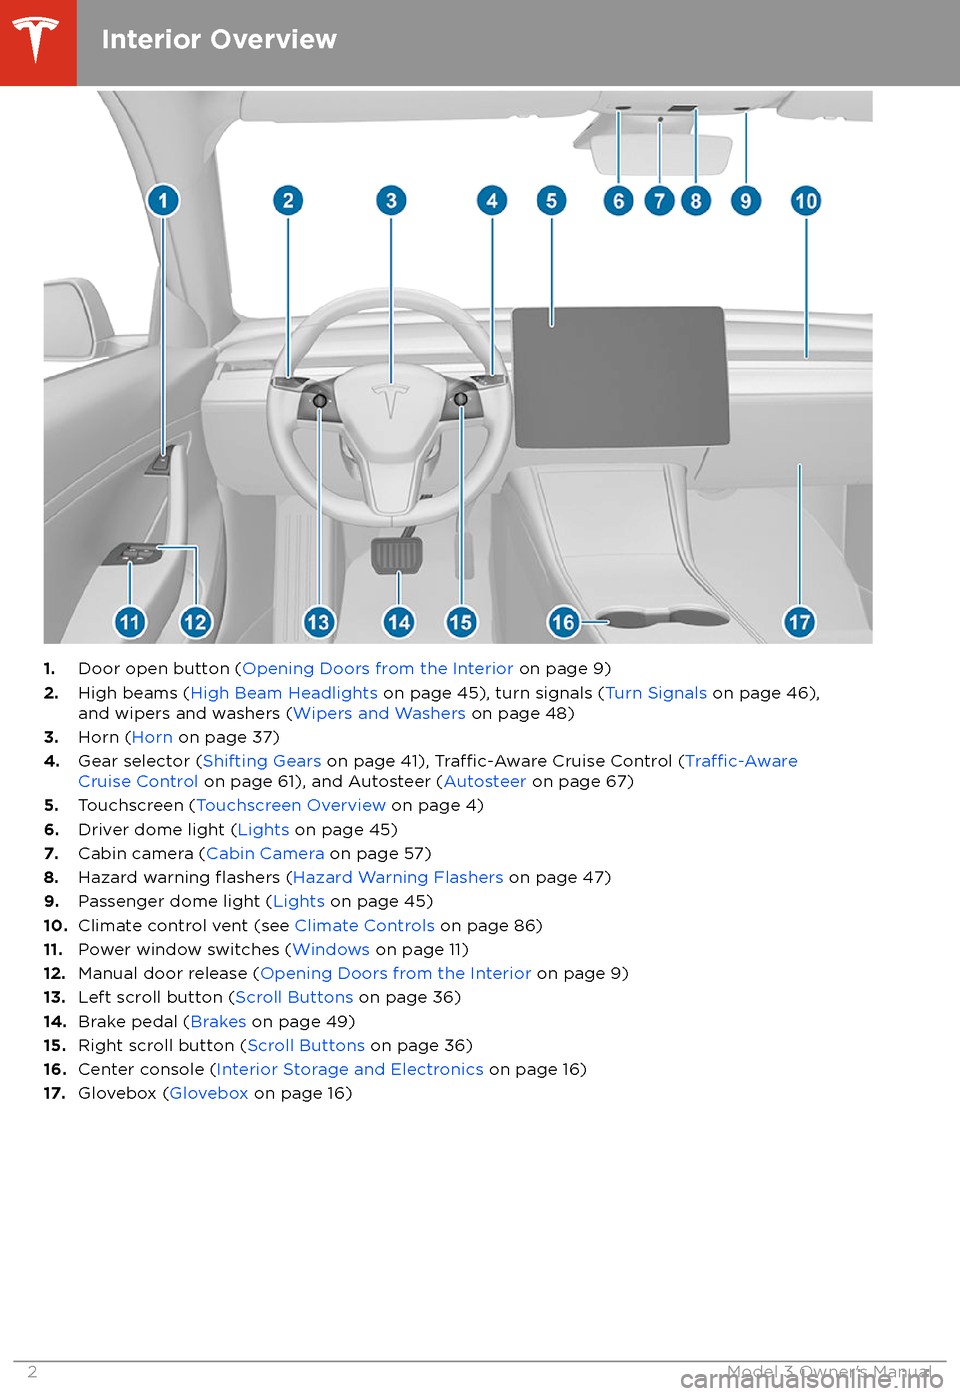 TESLA MODEL 3 2018  Owners Manual 1.Door open button ( Opening Doors from the Interior  on page 9)
2. High beams ( High Beam Headlights  on page 45), turn signals ( Turn Signals on page 46),
and wipers and washers ( Wipers and Washers